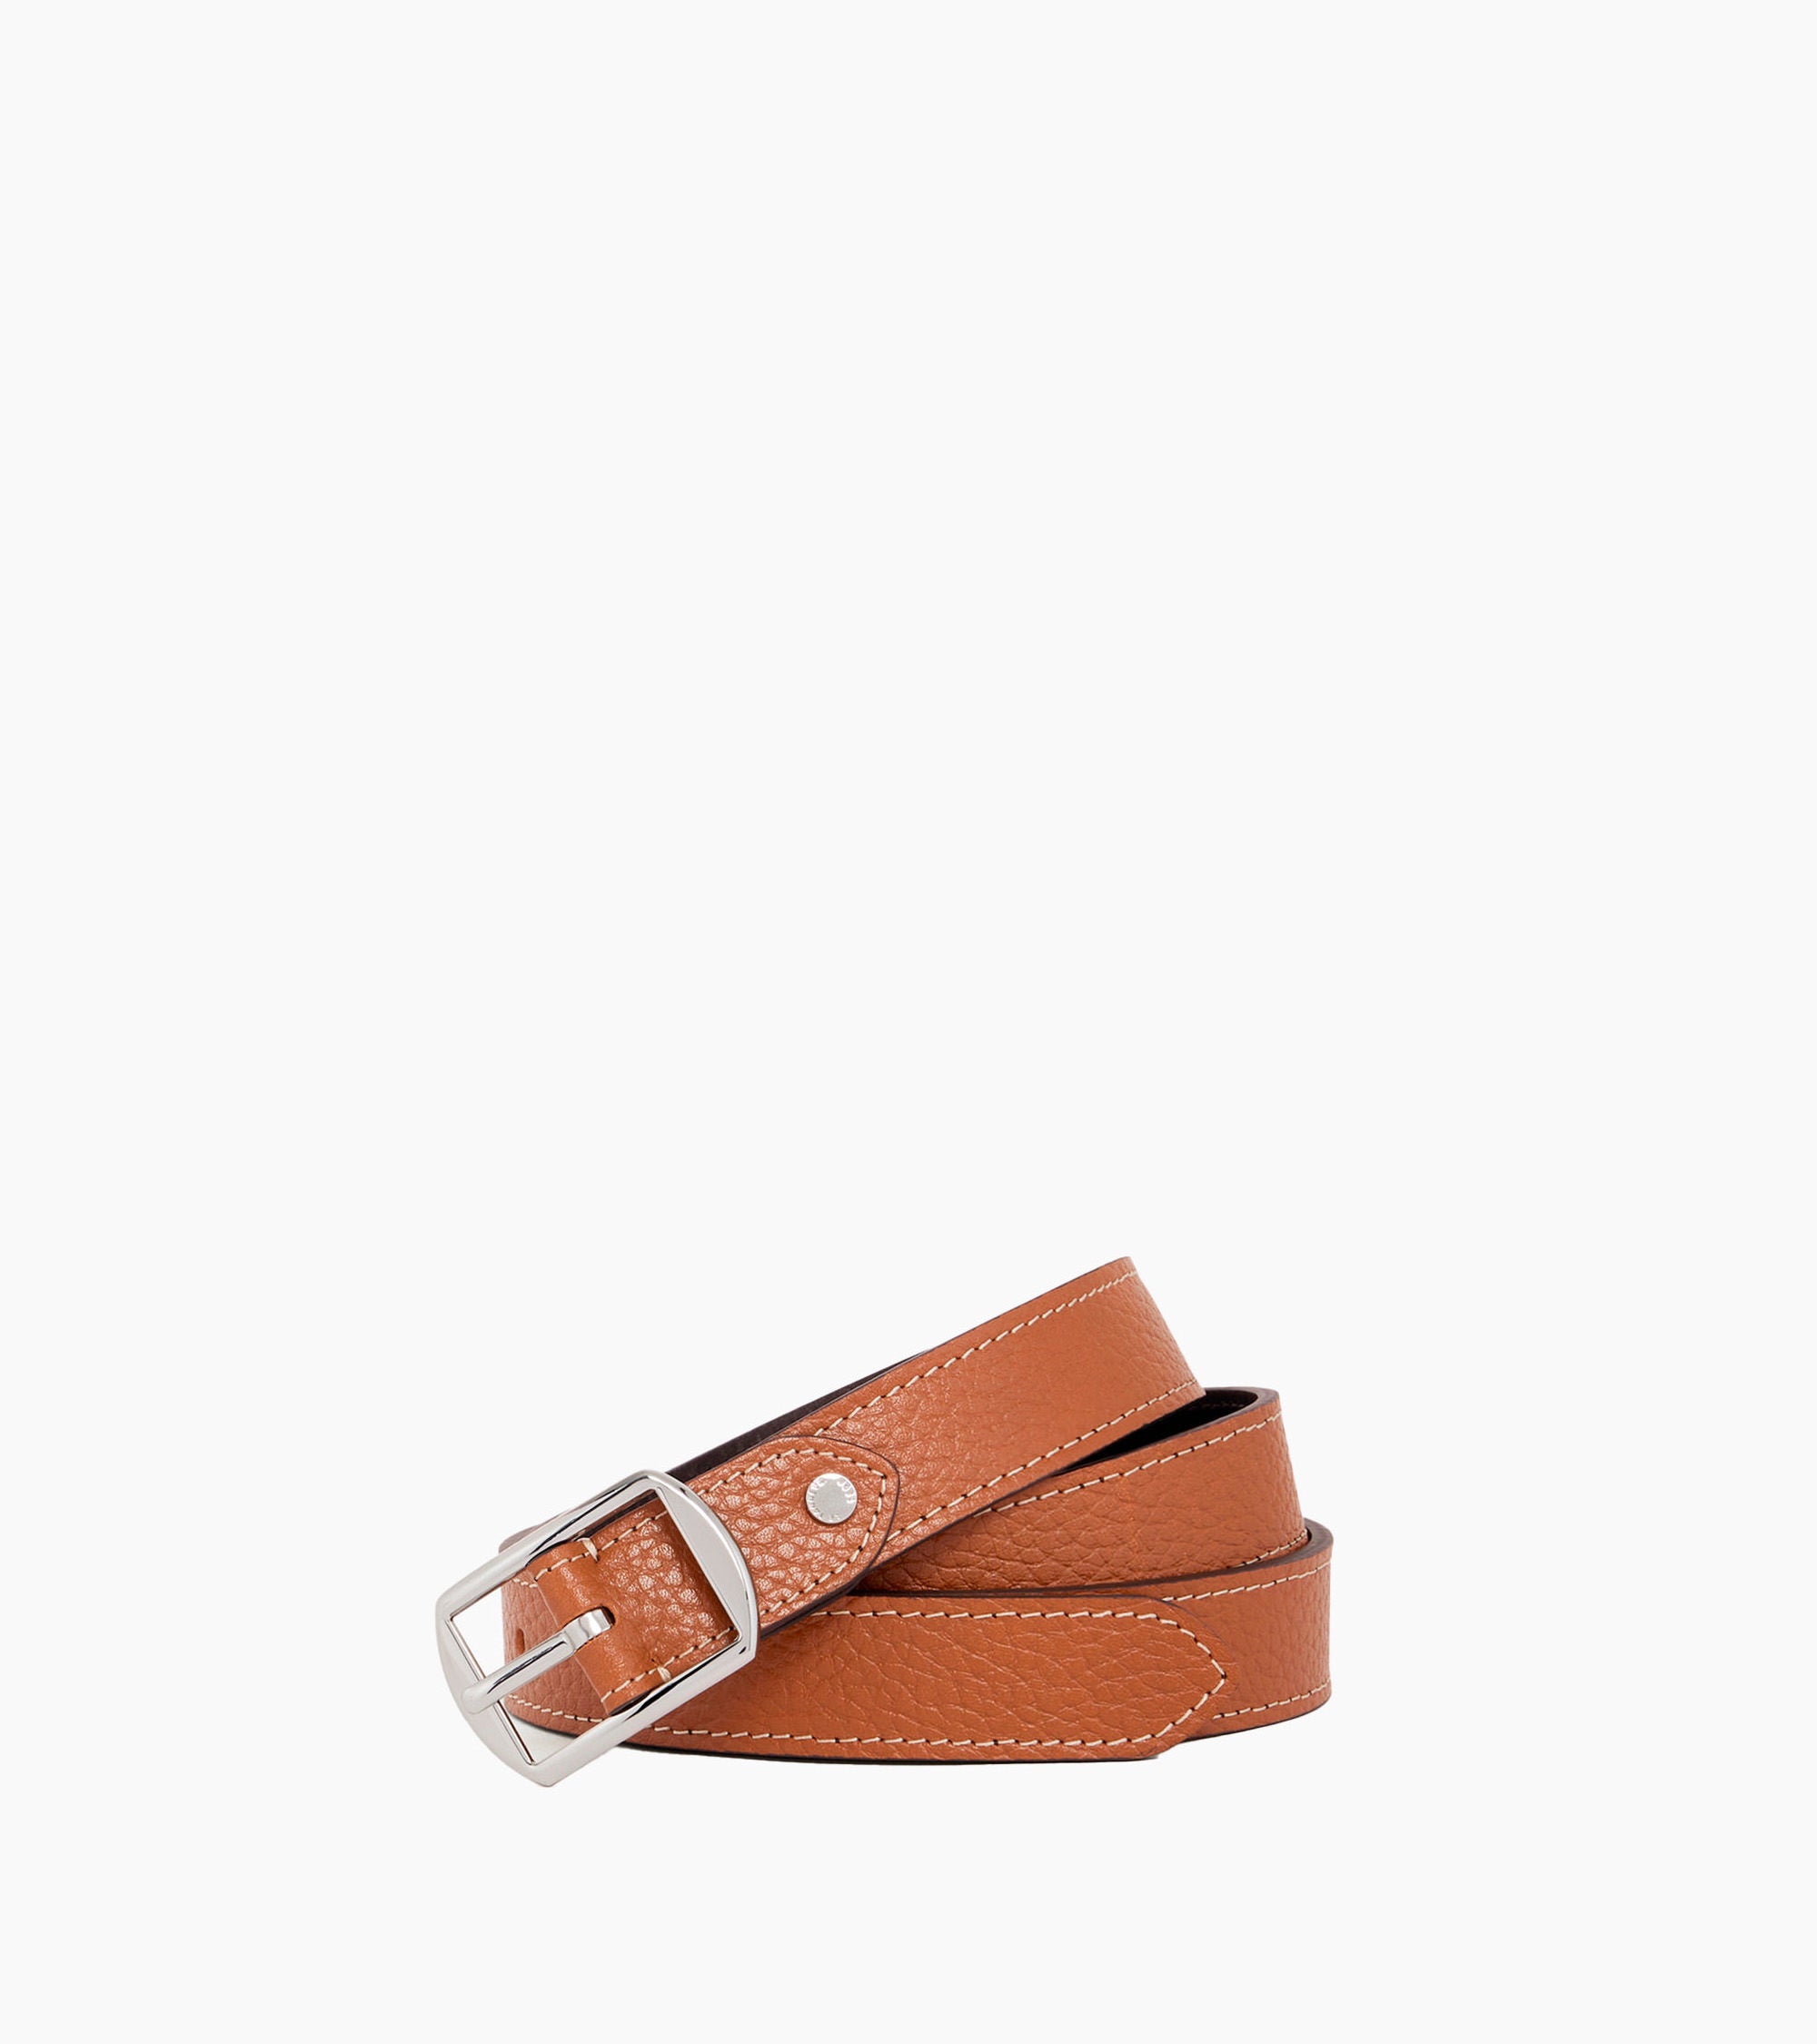 Women's reversible belt with square buckle in pebbled leather